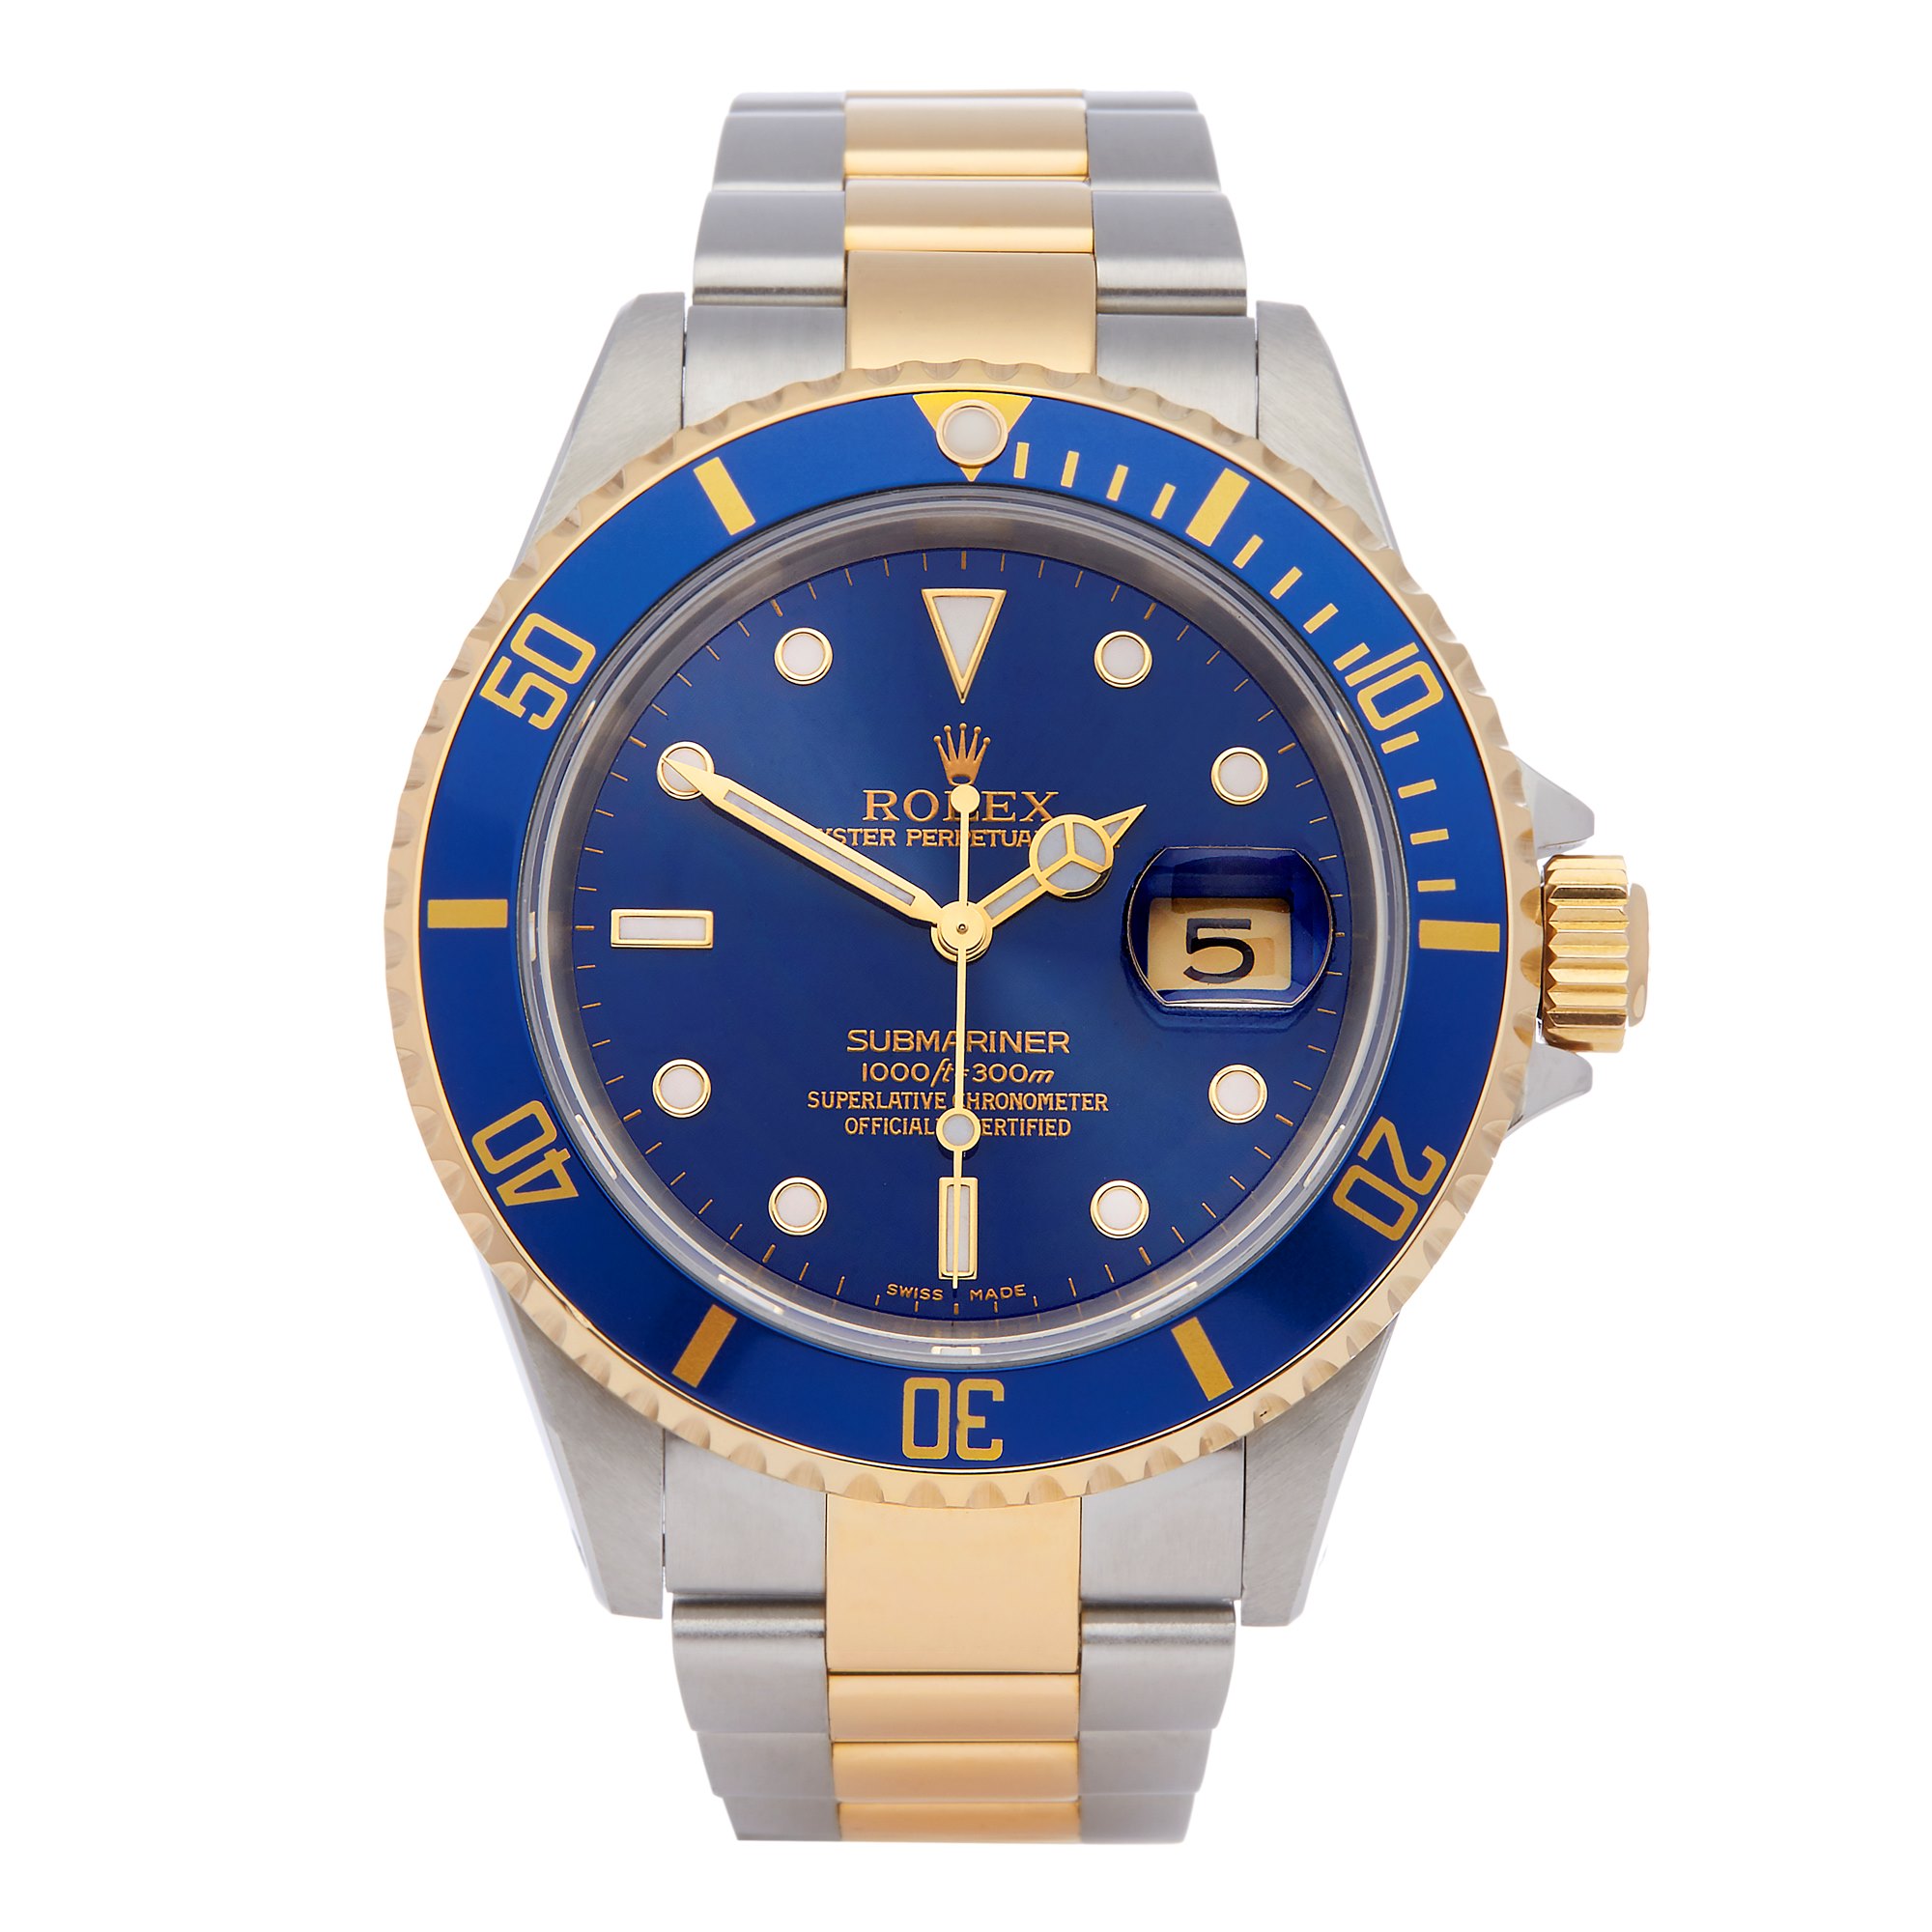 Pre-owned Rolex Watch Submariner 16613 